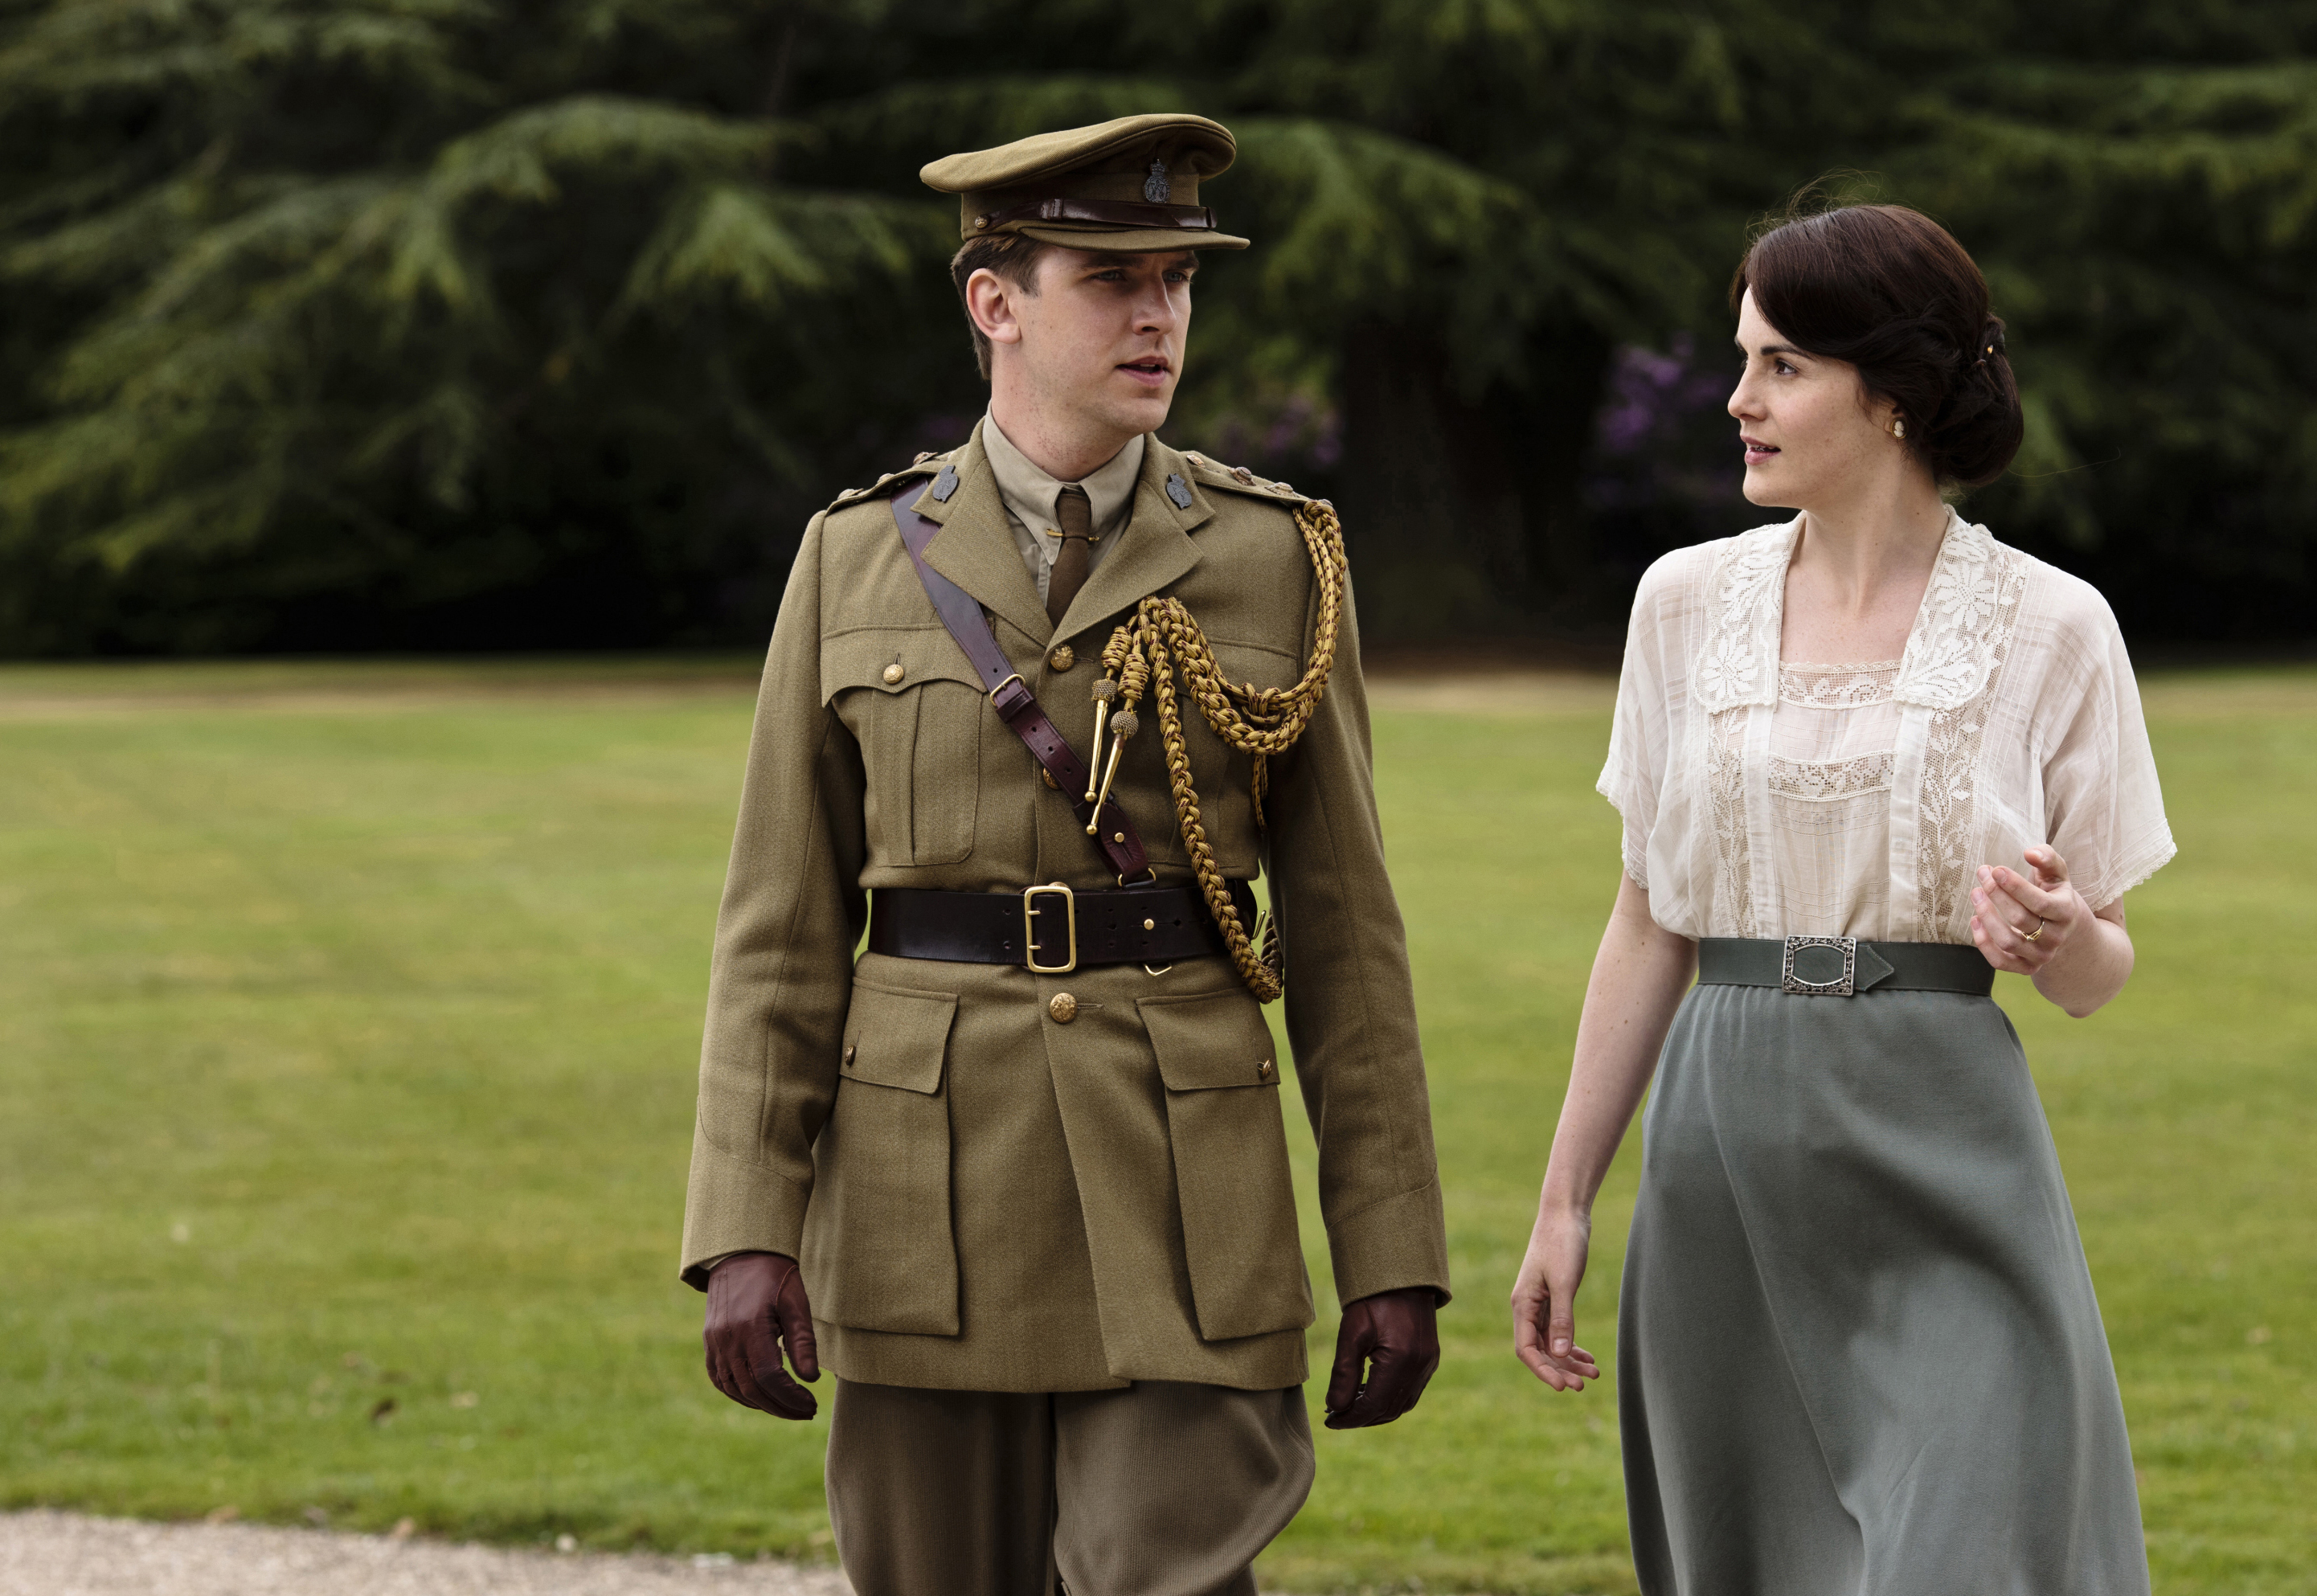 <p>Matthew Crawley looked handsome in his World War I military uniform as he walked with Lady Mary Crawley -- wearing a blouse and skirt that evoked the Edwardian fashion influences still in force from the previous decade -- on her family's estate on season 2 of "Downton Abbey."</p>